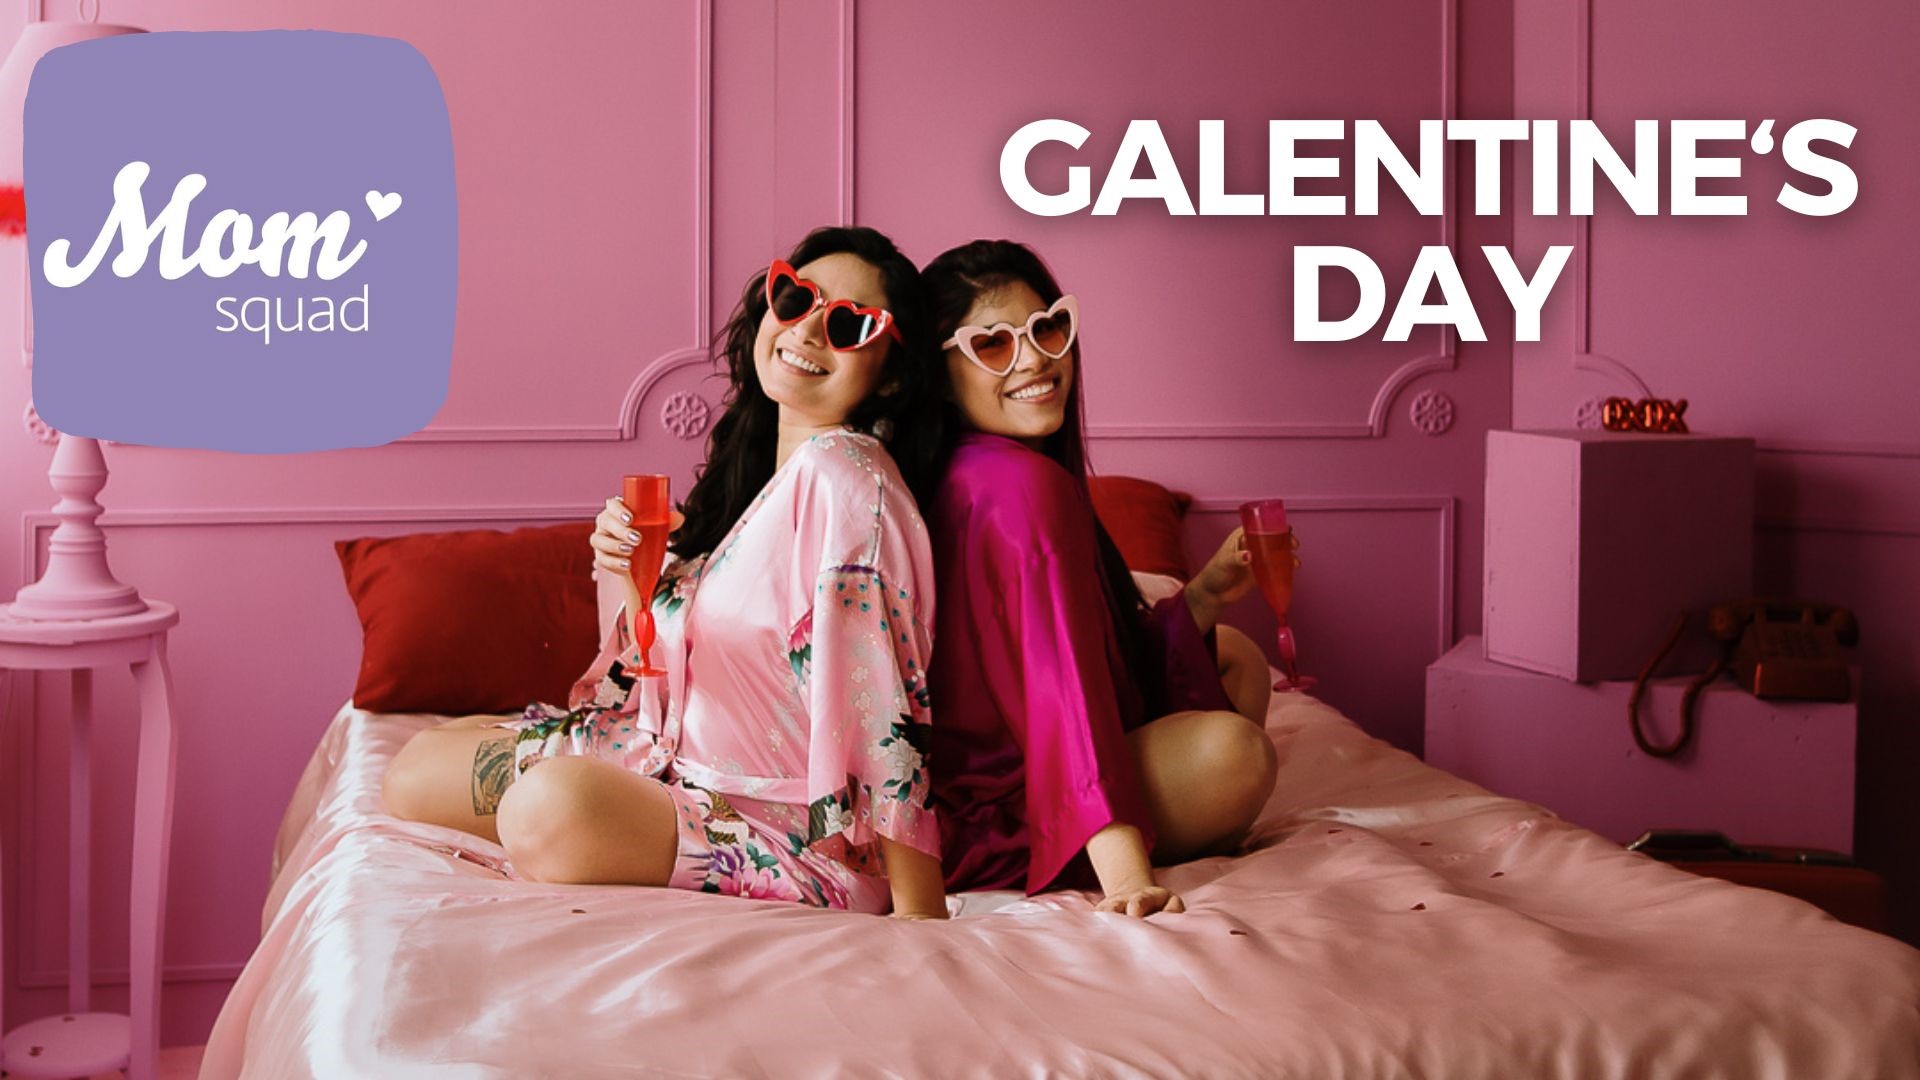 Maureen Kyle speaks with an expert on the importance of celebrating the friendships in your life and shares some tips on how to take part in Galentine's Day.